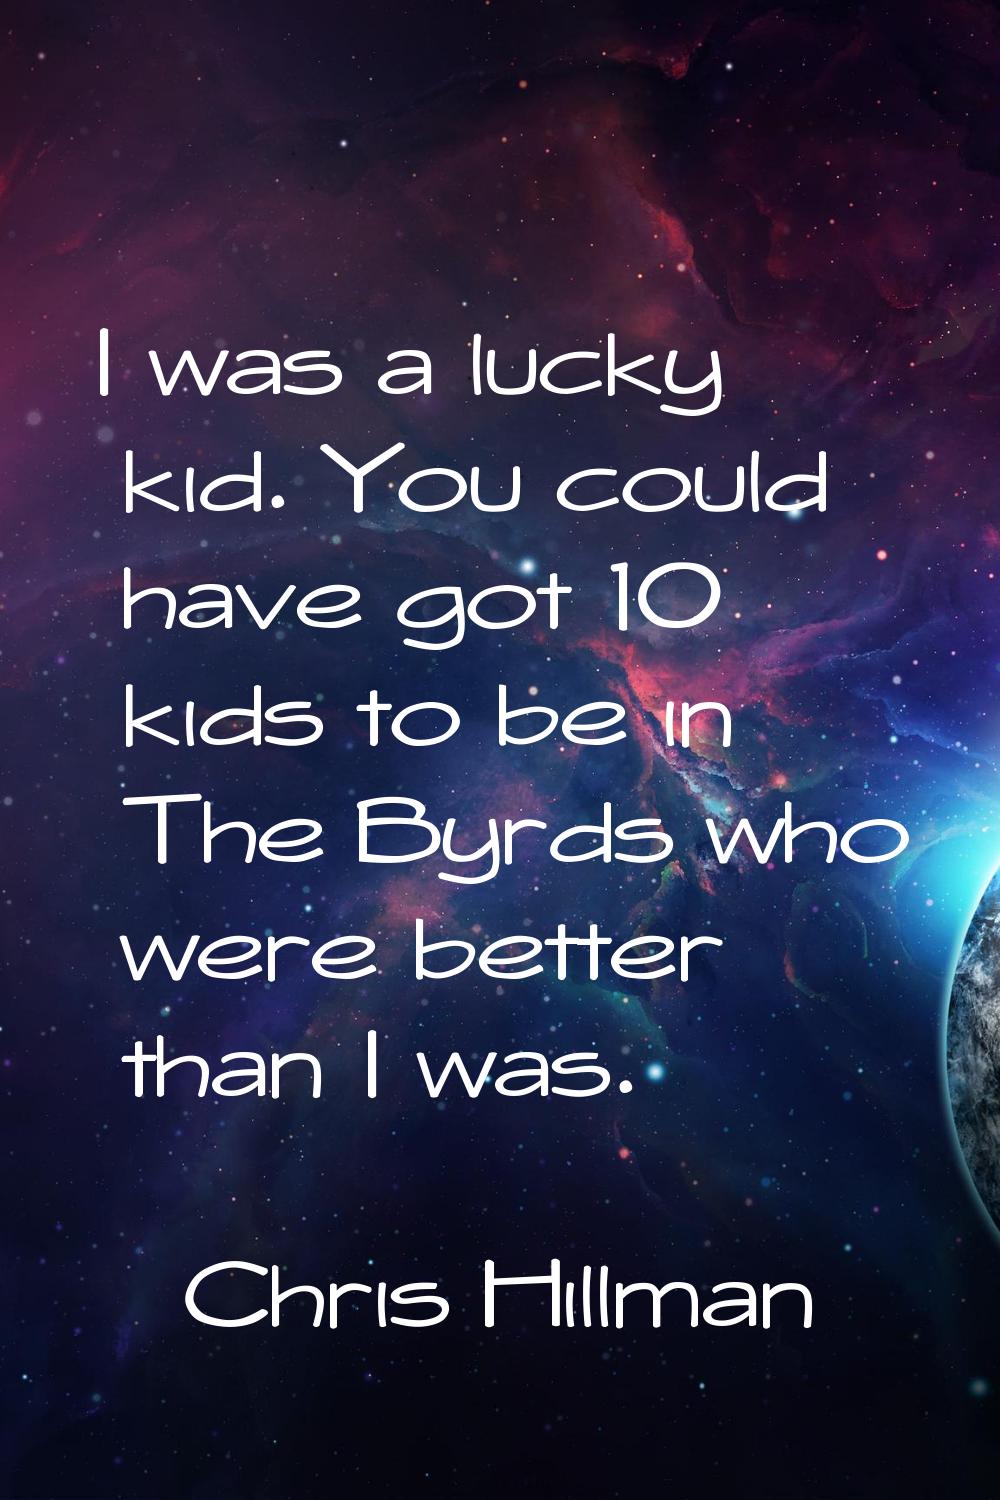 I was a lucky kid. You could have got 10 kids to be in The Byrds who were better than I was.